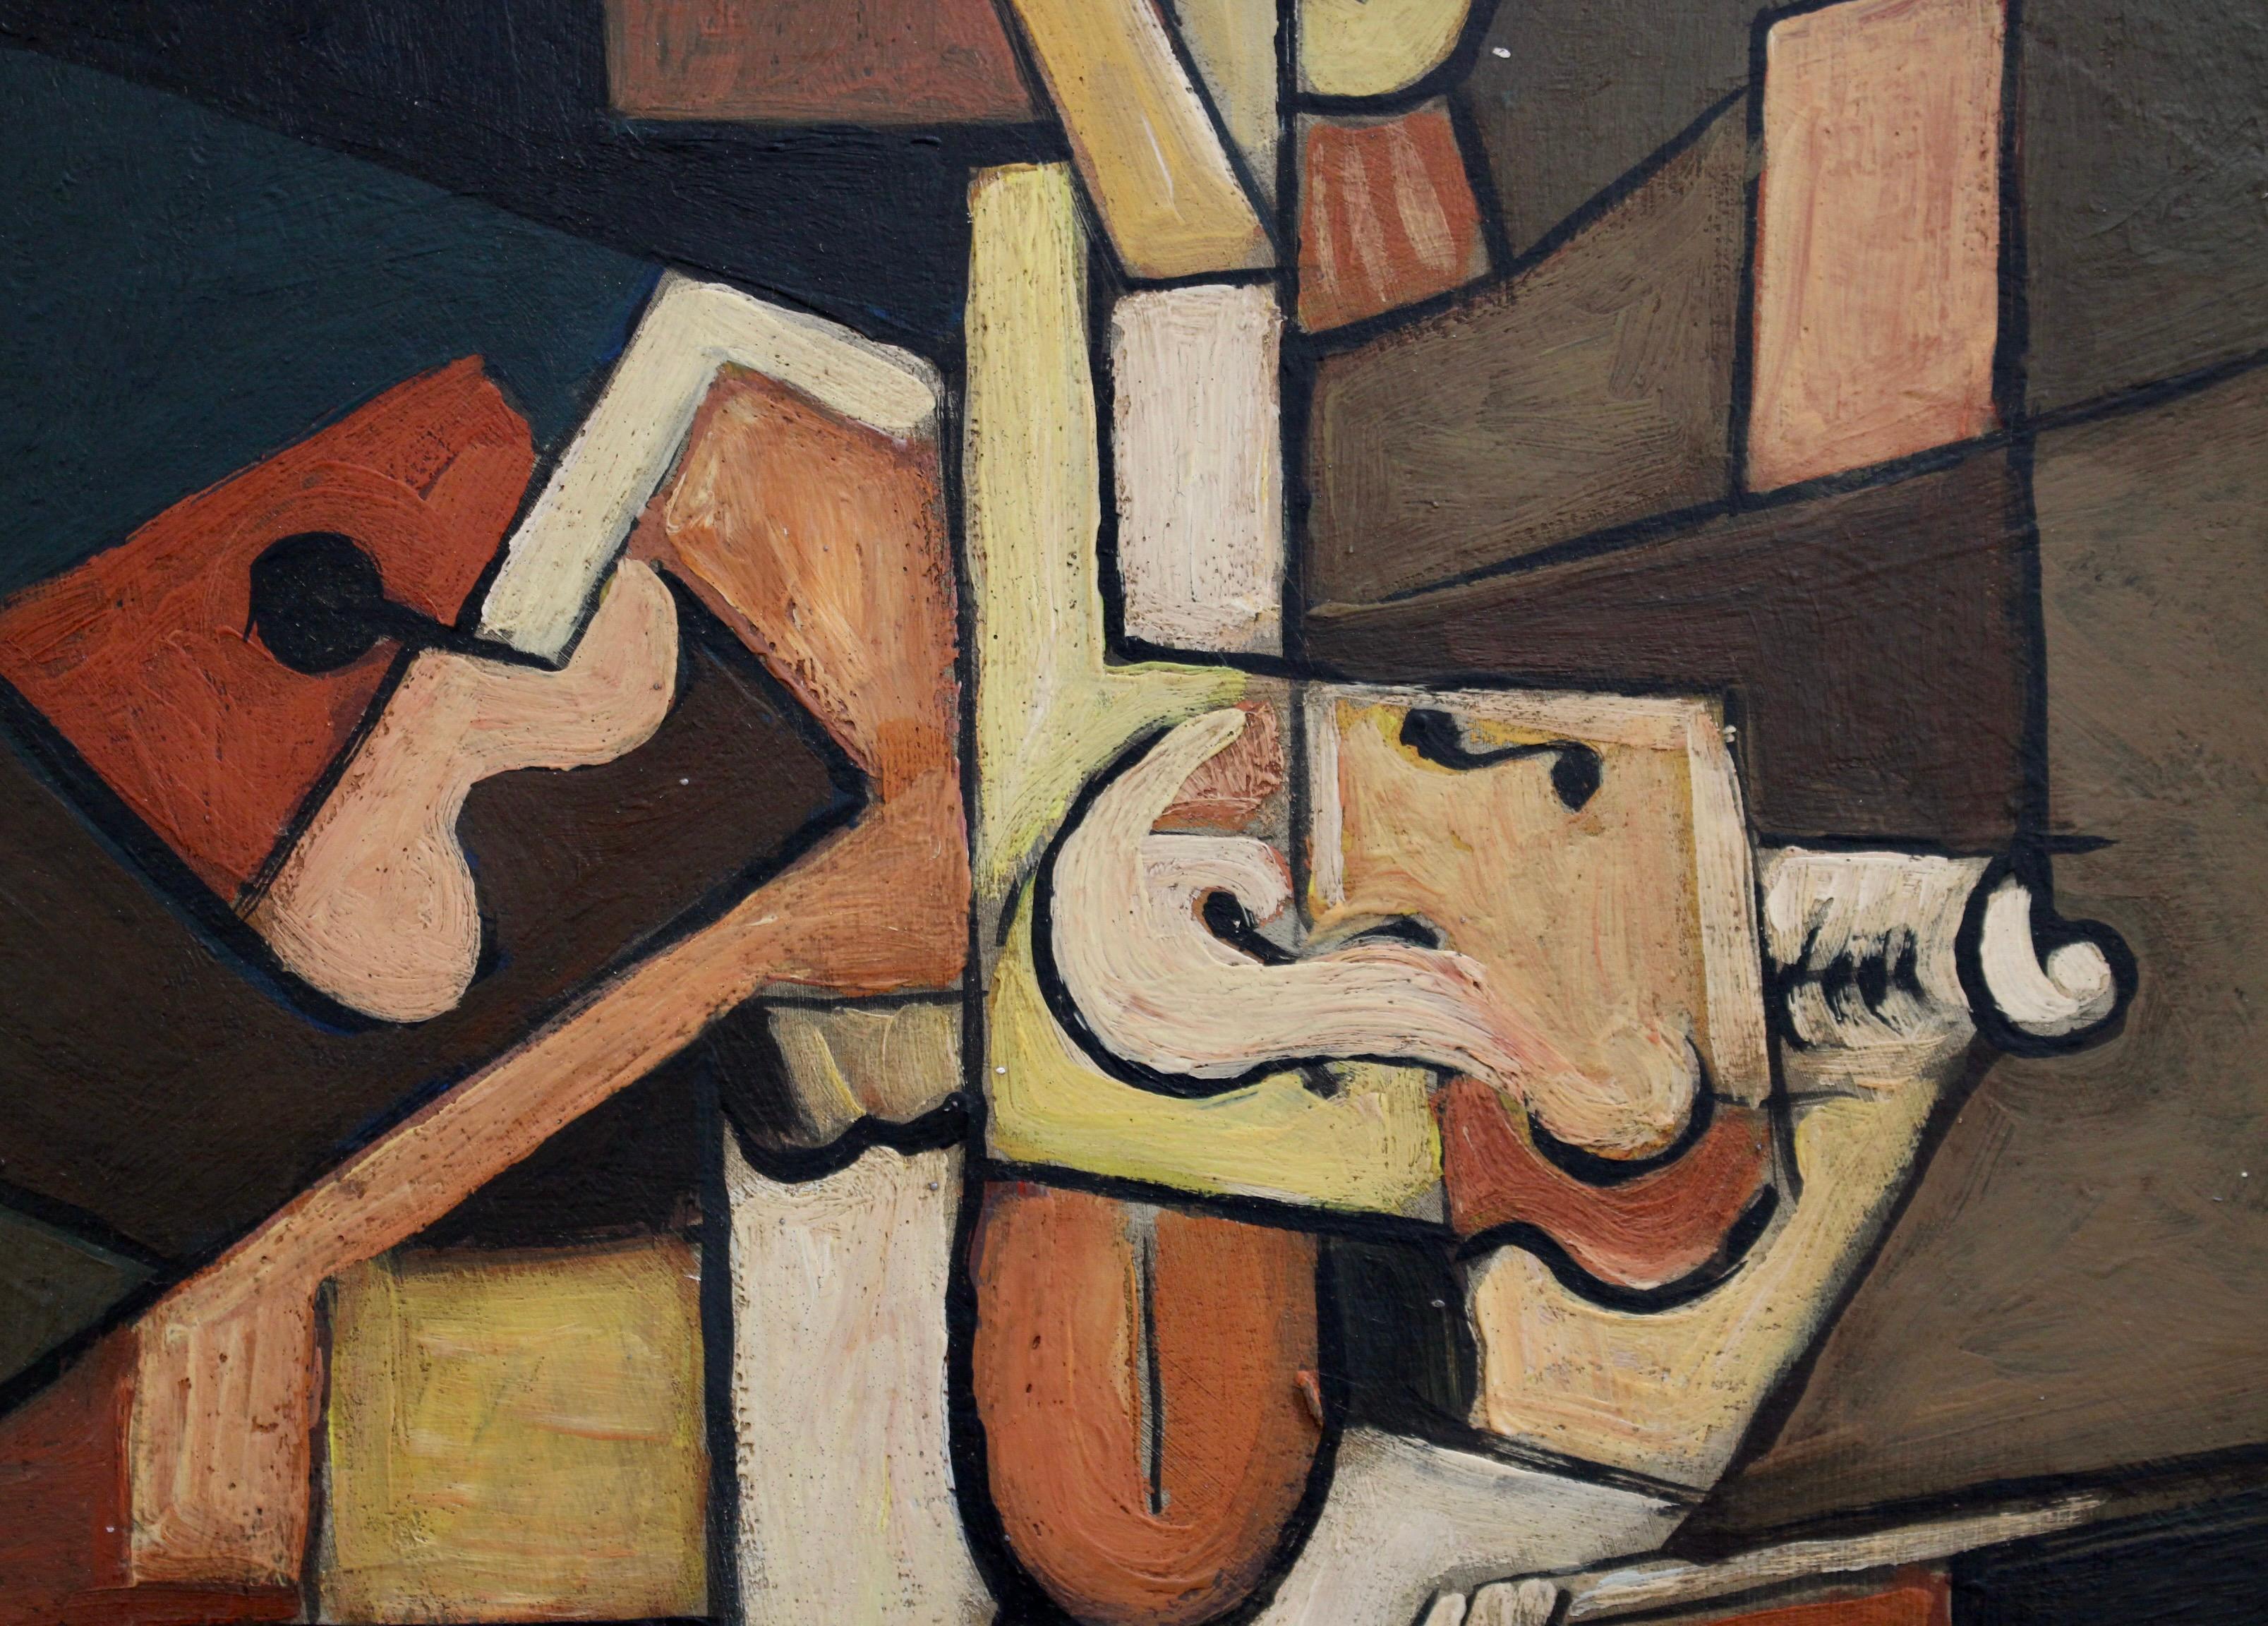 'The Violinist', oil on board, by J.G. (circa 1960s-1970s). Clearly inspired by Juan Gris' (1887-1927) and Georges Braque's (1882-1963) works, this painting is similar to experimental representations by both Braque and Picasso as well which